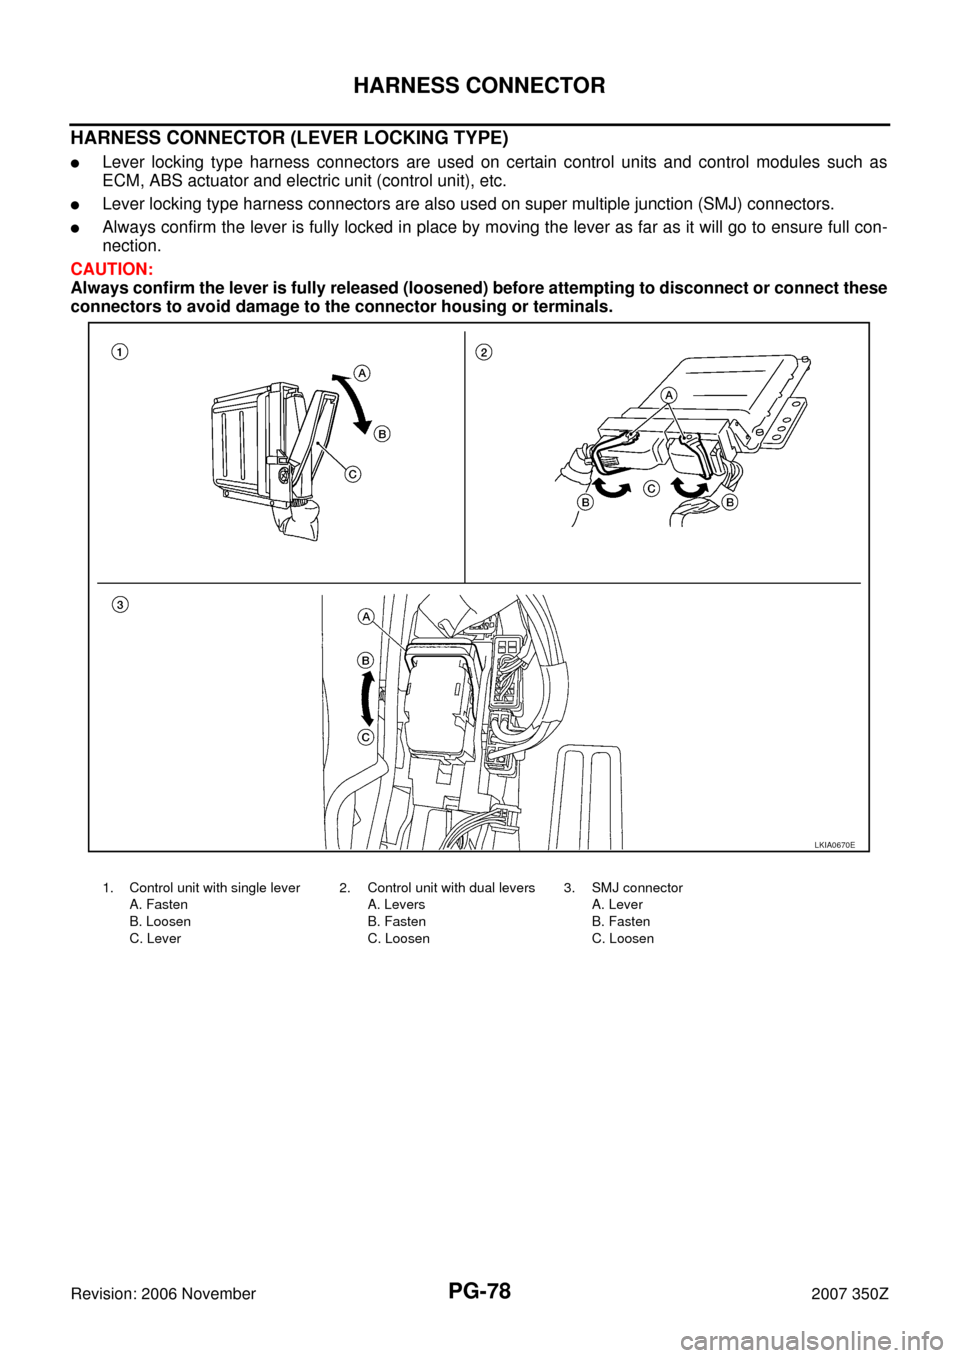 NISSAN 350Z 2007 Z33 Power Supply, Ground And Circuit Workshop Manual PG-78
HARNESS CONNECTOR
Revision: 2006 November2007 350Z
HARNESS CONNECTOR (LEVER LOCKING TYPE)
Lever locking type harness connectors are used on certain control units and control modules such as
ECM